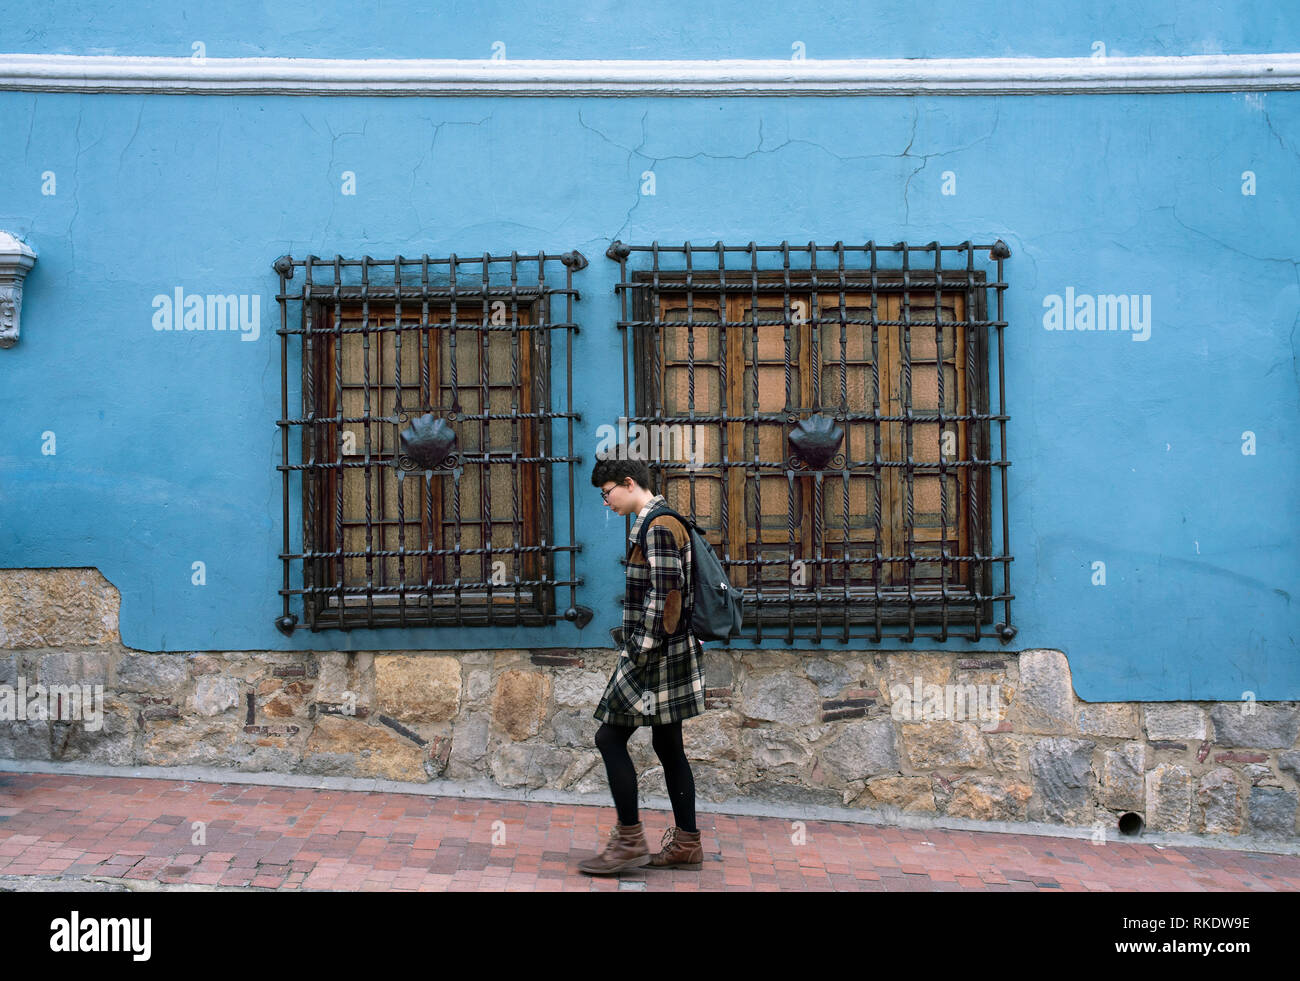 Student walking on the street of La Candelaria, historic district of Bogotá, Colombia. Rustic architectural details with matching colours. Sep 2018 Stock Photo